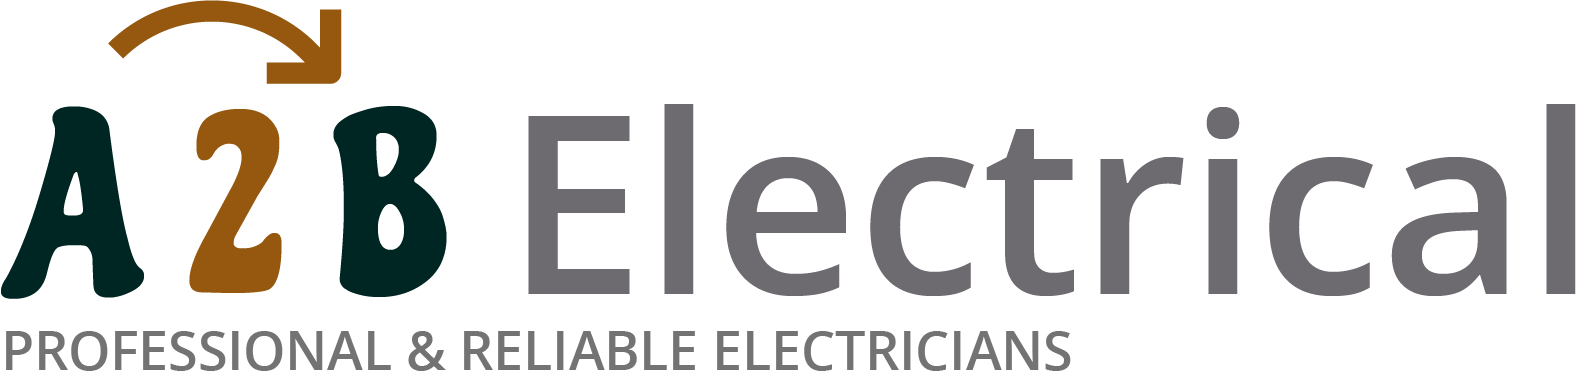 If you have electrical wiring problems in Bexhill, we can provide an electrician to have a look for you. 